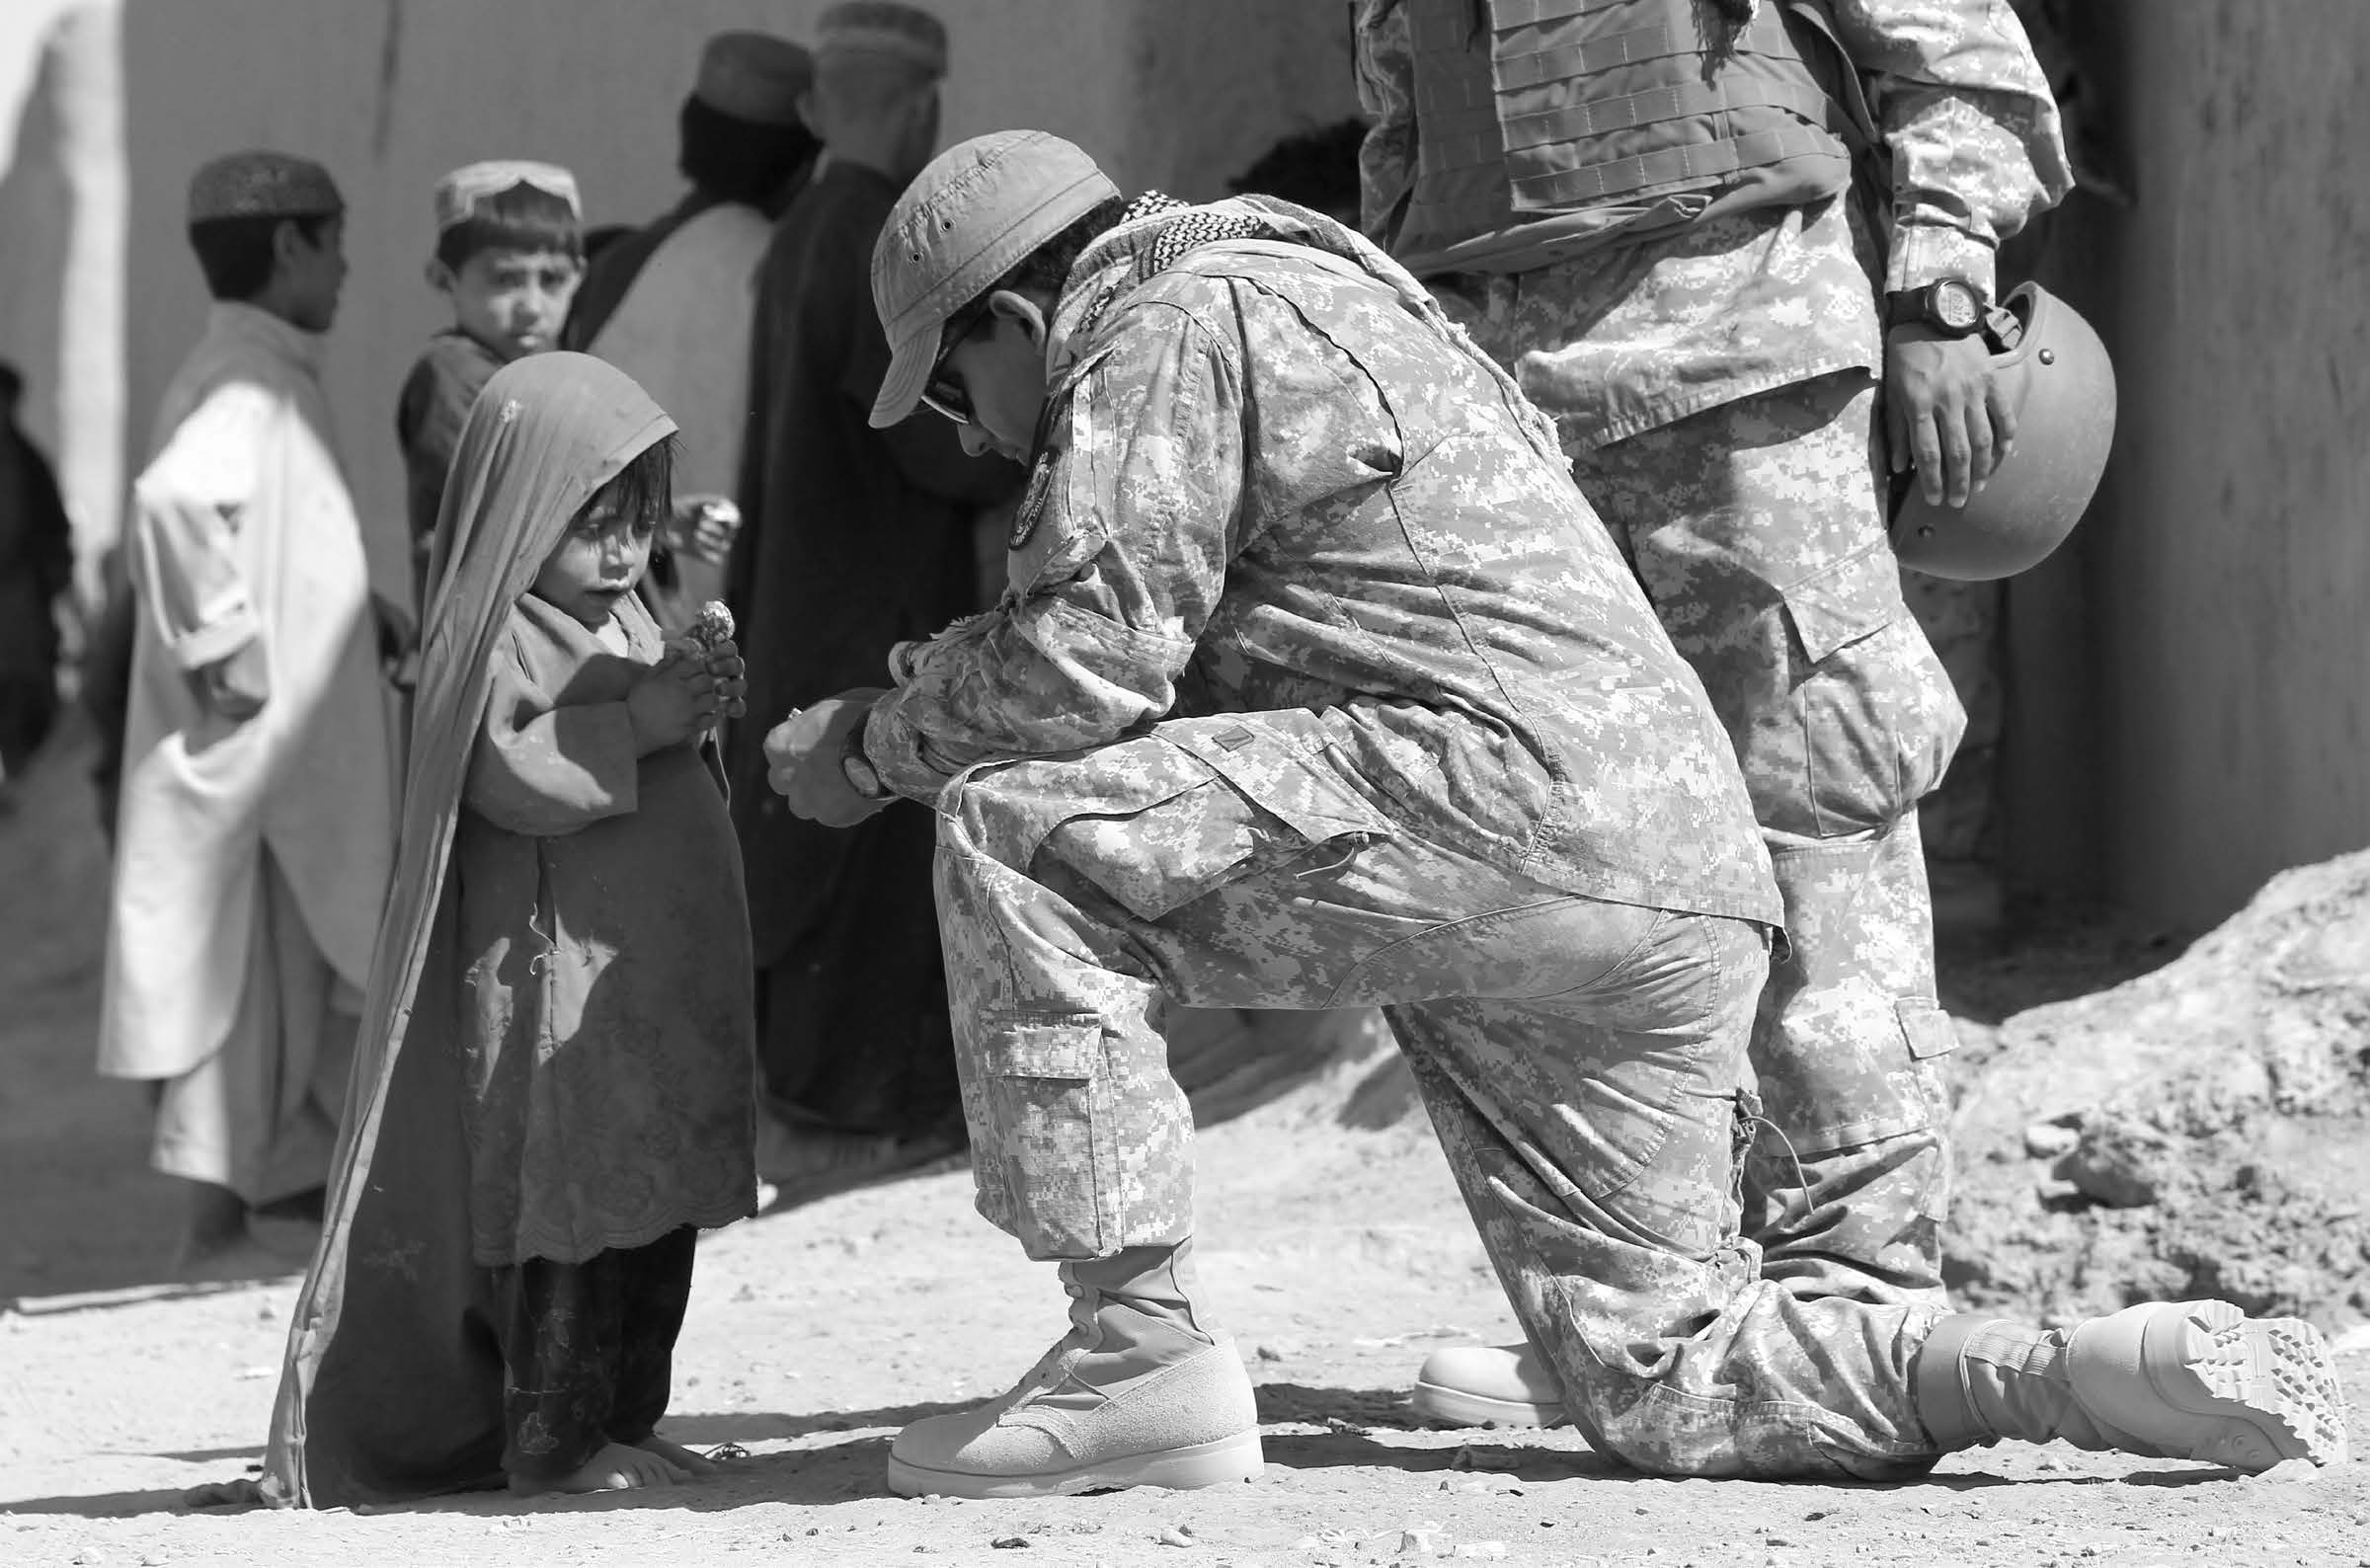 An American soldier kneels to give a lollipop to an Afghan child. Courtesy of J. Joseph DuWors.